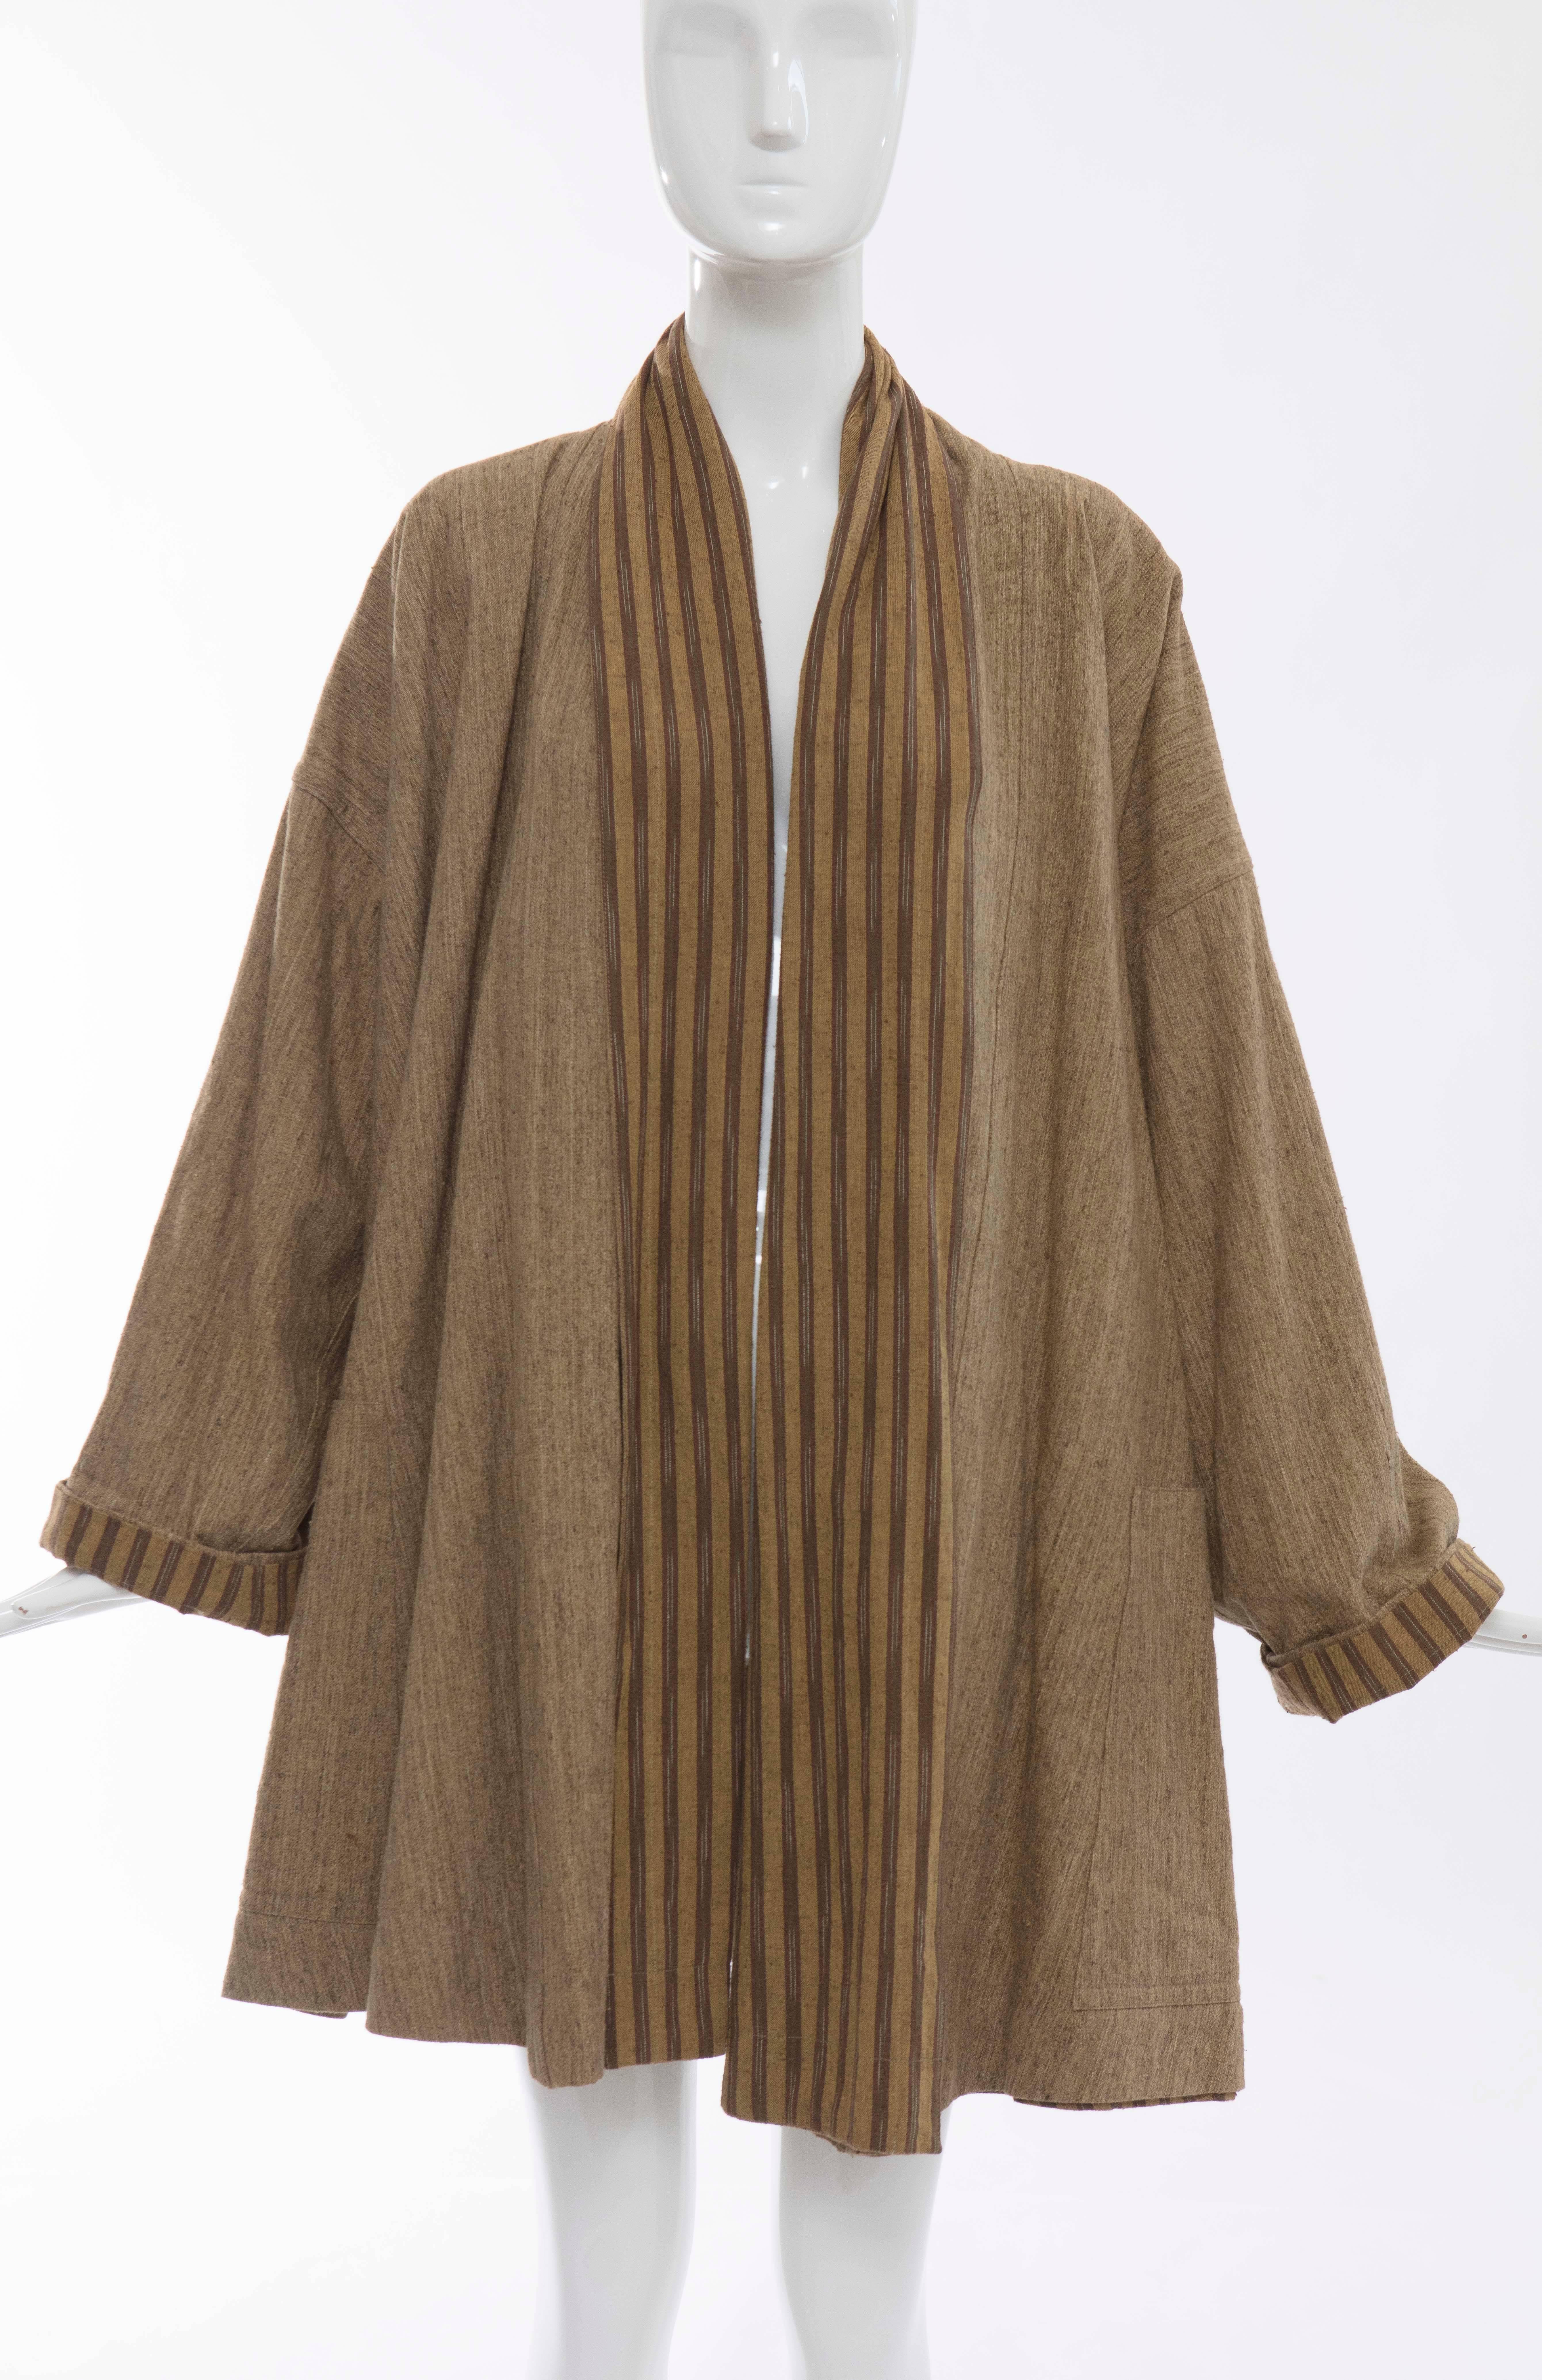 Issey Miyake Plantation, circa 1980's reversible striped woven cotton jacket with two deep front pockets.

Japan: No Size Label

Bust 58, Waist 58, Hips 58, Sleeve 18, Length 35